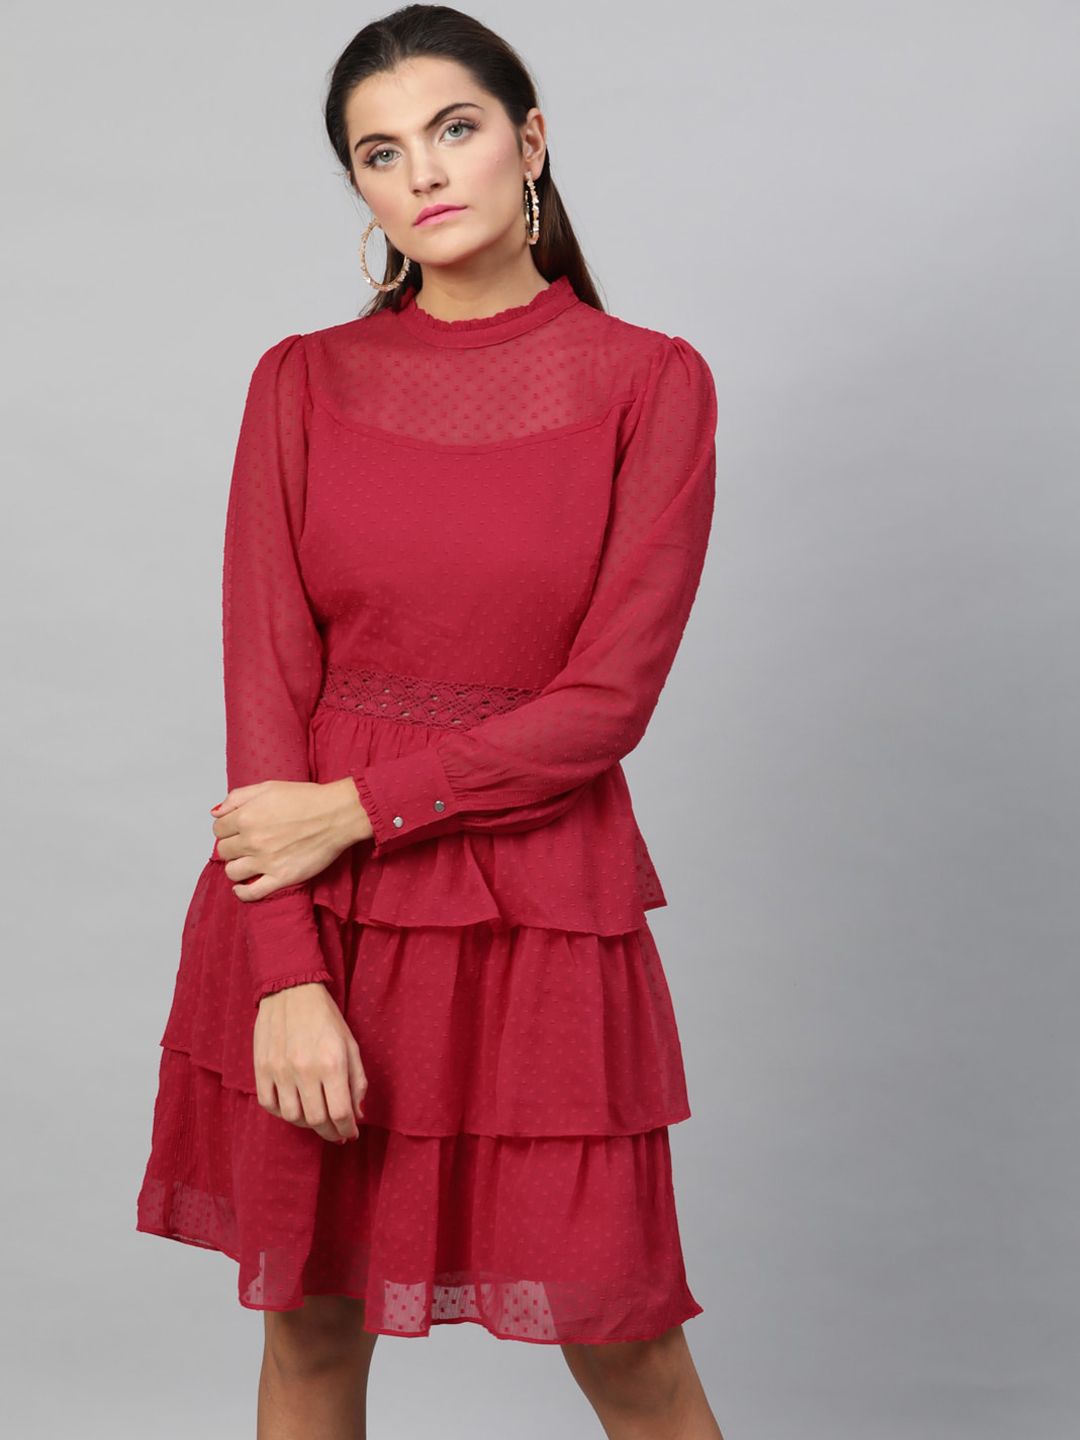 STREET 9 Women Red Self Design Fit and Flare Dress Price in India